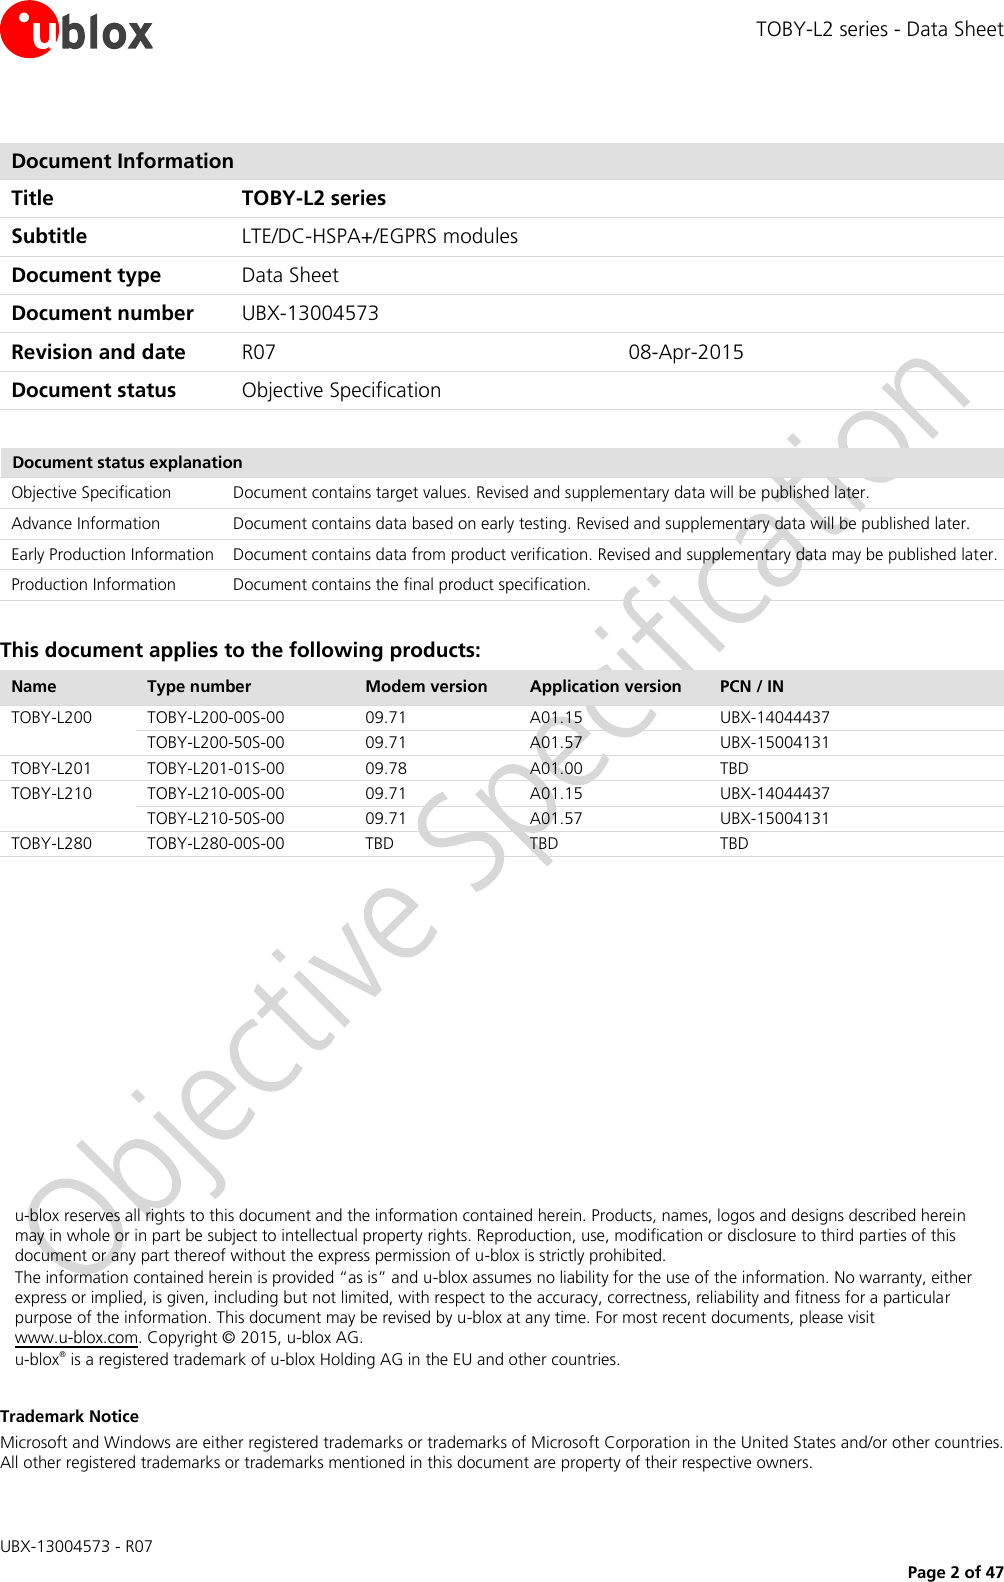 TOBY-L2 series - Data Sheet  UBX-13004573 - R07     Page 2 of 47  Document Information Title TOBY-L2 series Subtitle LTE/DC-HSPA+/EGPRS modules  Document type Data Sheet  Document number UBX-13004573 Revision and date R07 08-Apr-2015 Document status Objective Specification  Document status explanation Objective Specification Document contains target values. Revised and supplementary data will be published later. Advance Information Document contains data based on early testing. Revised and supplementary data will be published later. Early Production Information Document contains data from product verification. Revised and supplementary data may be published later. Production Information Document contains the final product specification.  This document applies to the following products: Name Type number Modem version Application version PCN / IN TOBY-L200 TOBY-L200-00S-00 09.71 A01.15 UBX-14044437  TOBY-L200-50S-00 09.71 A01.57 UBX-15004131 TOBY-L201 TOBY-L201-01S-00 09.78 A01.00 TBD  TOBY-L210 TOBY-L210-00S-00 09.71 A01.15 UBX-14044437  TOBY-L210-50S-00 09.71 A01.57 UBX-15004131 TOBY-L280 TOBY-L280-00S-00 TBD TBD TBD             u-blox reserves all rights to this document and the information contained herein. Products, names, logos and designs described herein may in whole or in part be subject to intellectual property rights. Reproduction, use, modification or disclosure to third parties of this document or any part thereof without the express permission of u-blox is strictly prohibited. The information contained herein is provided “as is” and u-blox assumes no liability for the use of the information. No warranty, either express or implied, is given, including but not limited, with respect to the accuracy, correctness, reliability and fitness for a particular purpose of the information. This document may be revised by u-blox at any time. For most recent documents, please visit  www.u-blox.com. Copyright © 2015, u-blox AG. u-blox® is a registered trademark of u-blox Holding AG in the EU and other countries.  Trademark Notice Microsoft and Windows are either registered trademarks or trademarks of Microsoft Corporation in the United States and/or other countries. All other registered trademarks or trademarks mentioned in this document are property of their respective owners. 